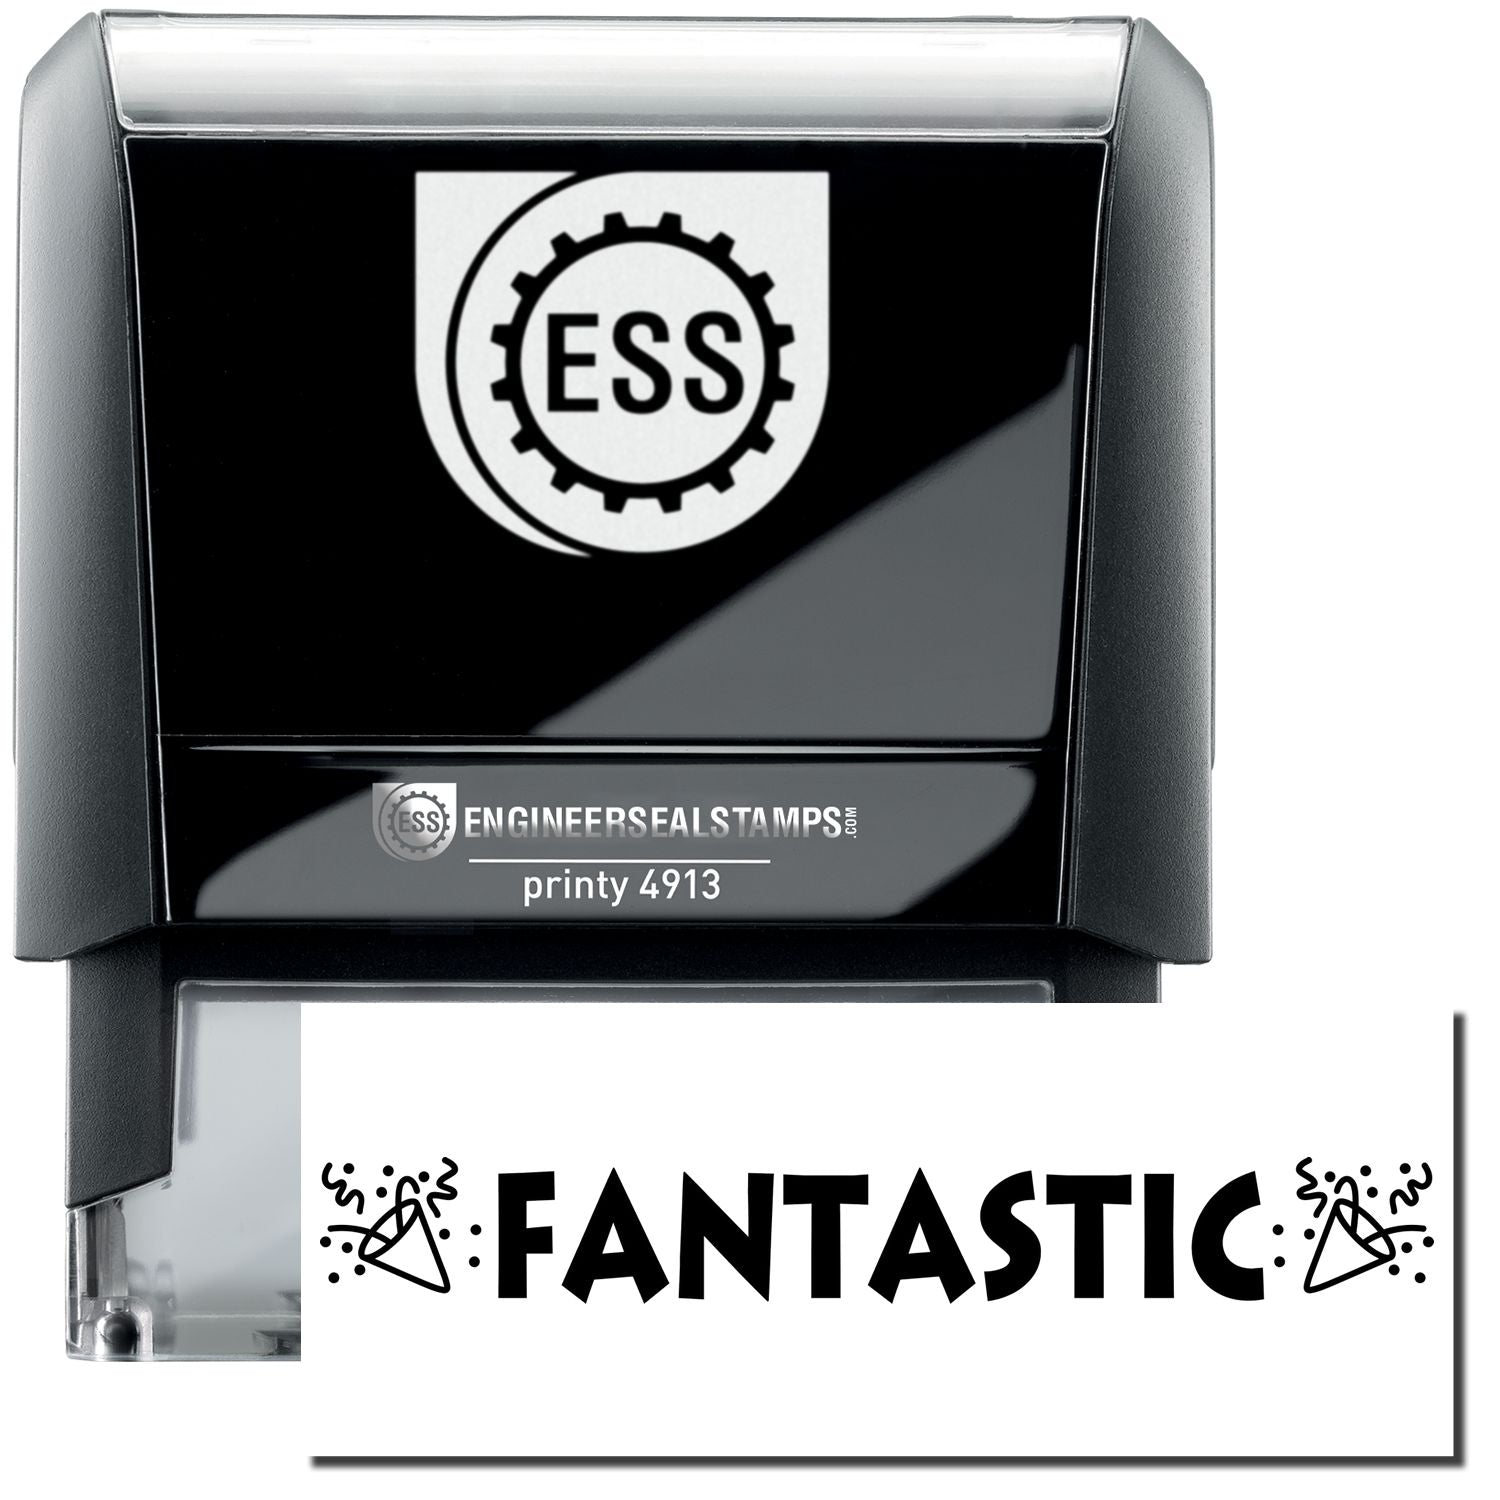 A self-inking stamp with a stamped image showing how the text "FANTASTIC" in large jagged letters (in bold font) and the image of noise blowers on each side is displayed after stamping.